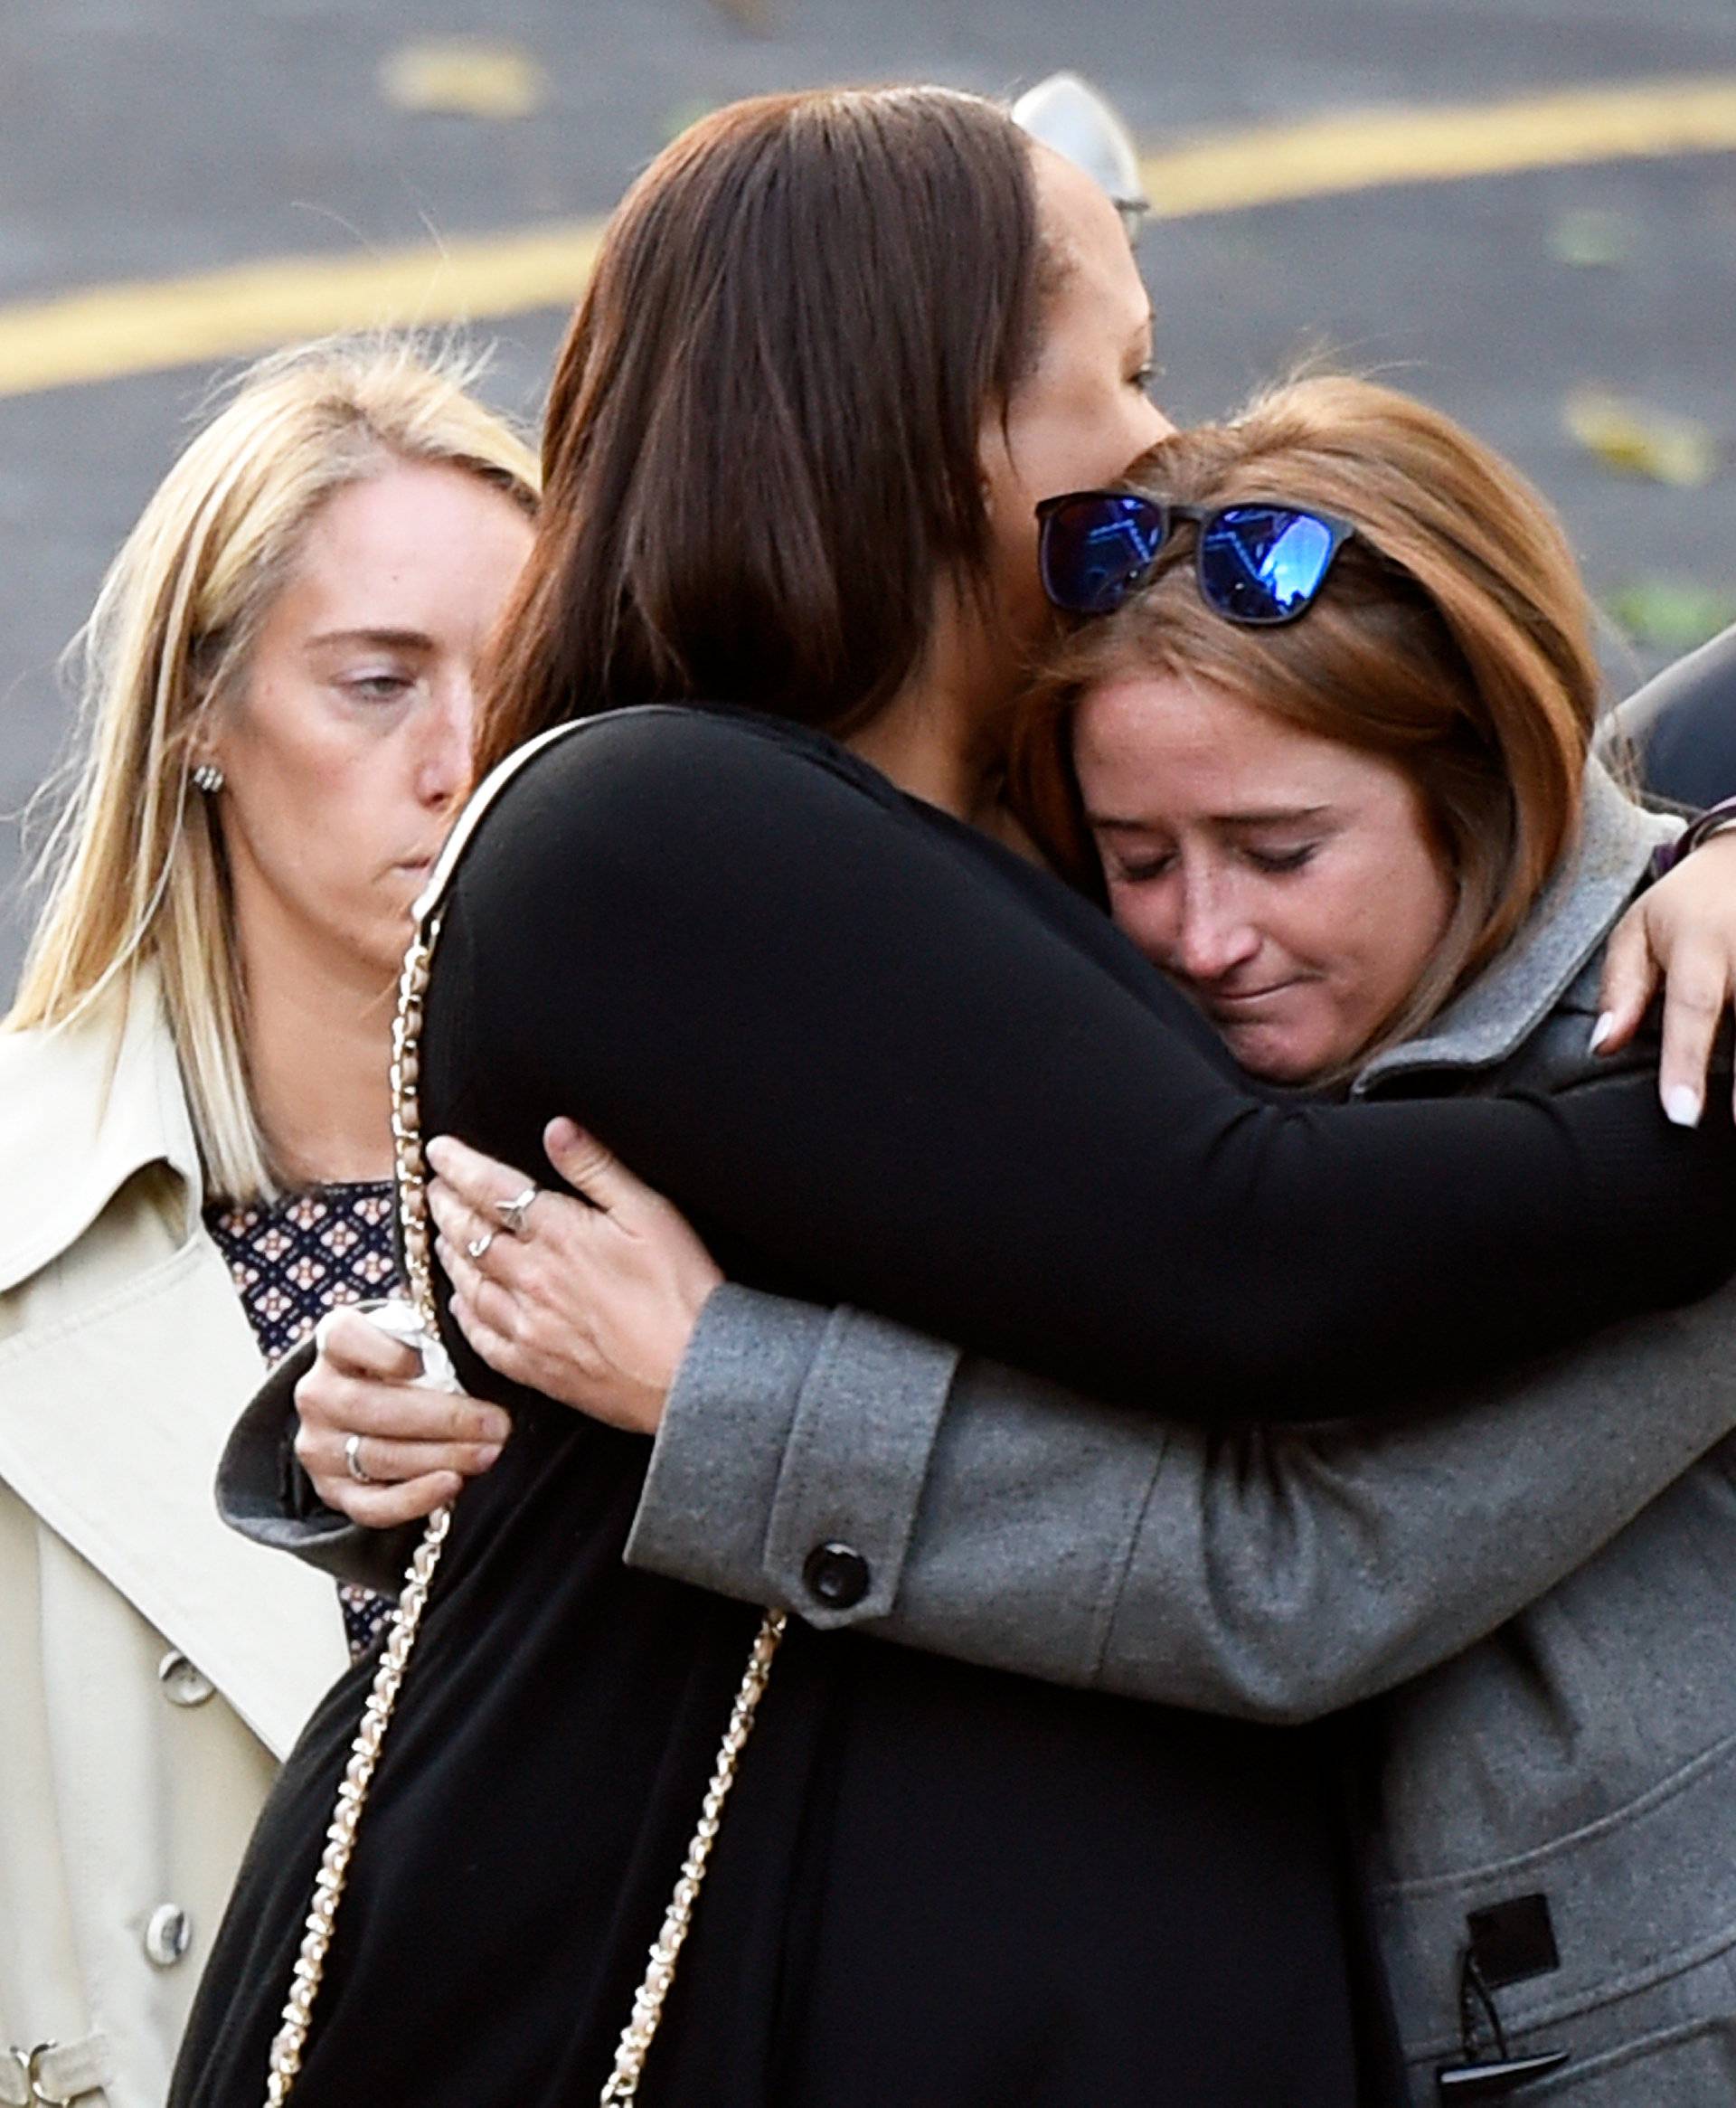 Mourners attend a combined wake for the victims of Saturday's limousine crash in Amsterdam